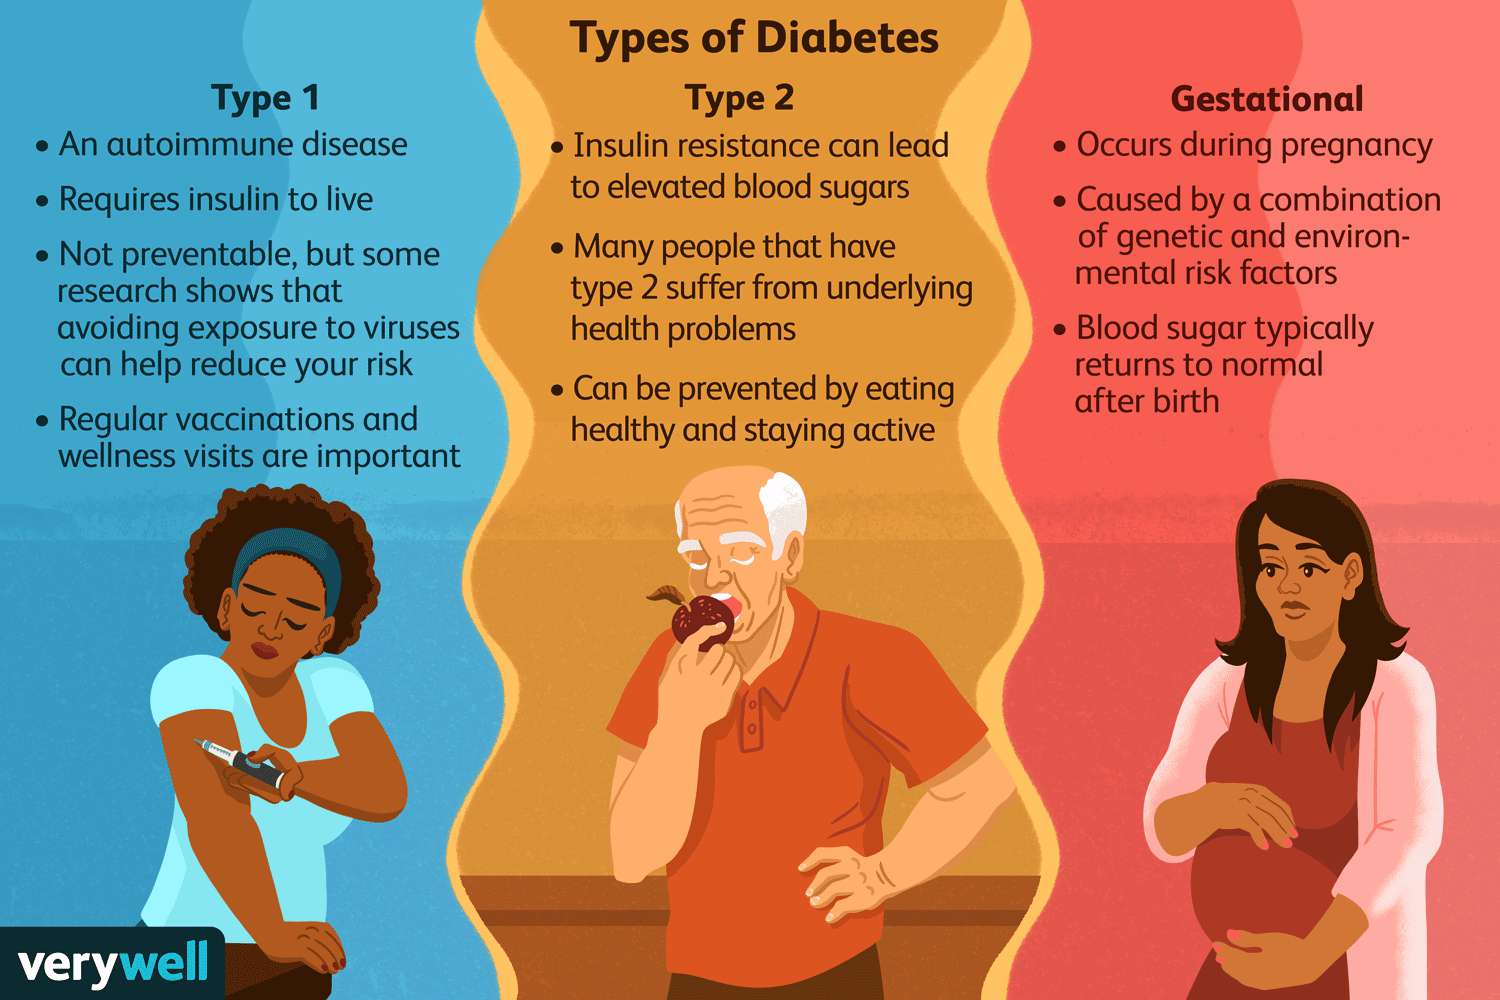 How Many Types of Diabetes are There 9 2bc36158db3b46aa8976e7a0b8c4717d 2bc36158db3b46aa8976e7a0b8c4717d